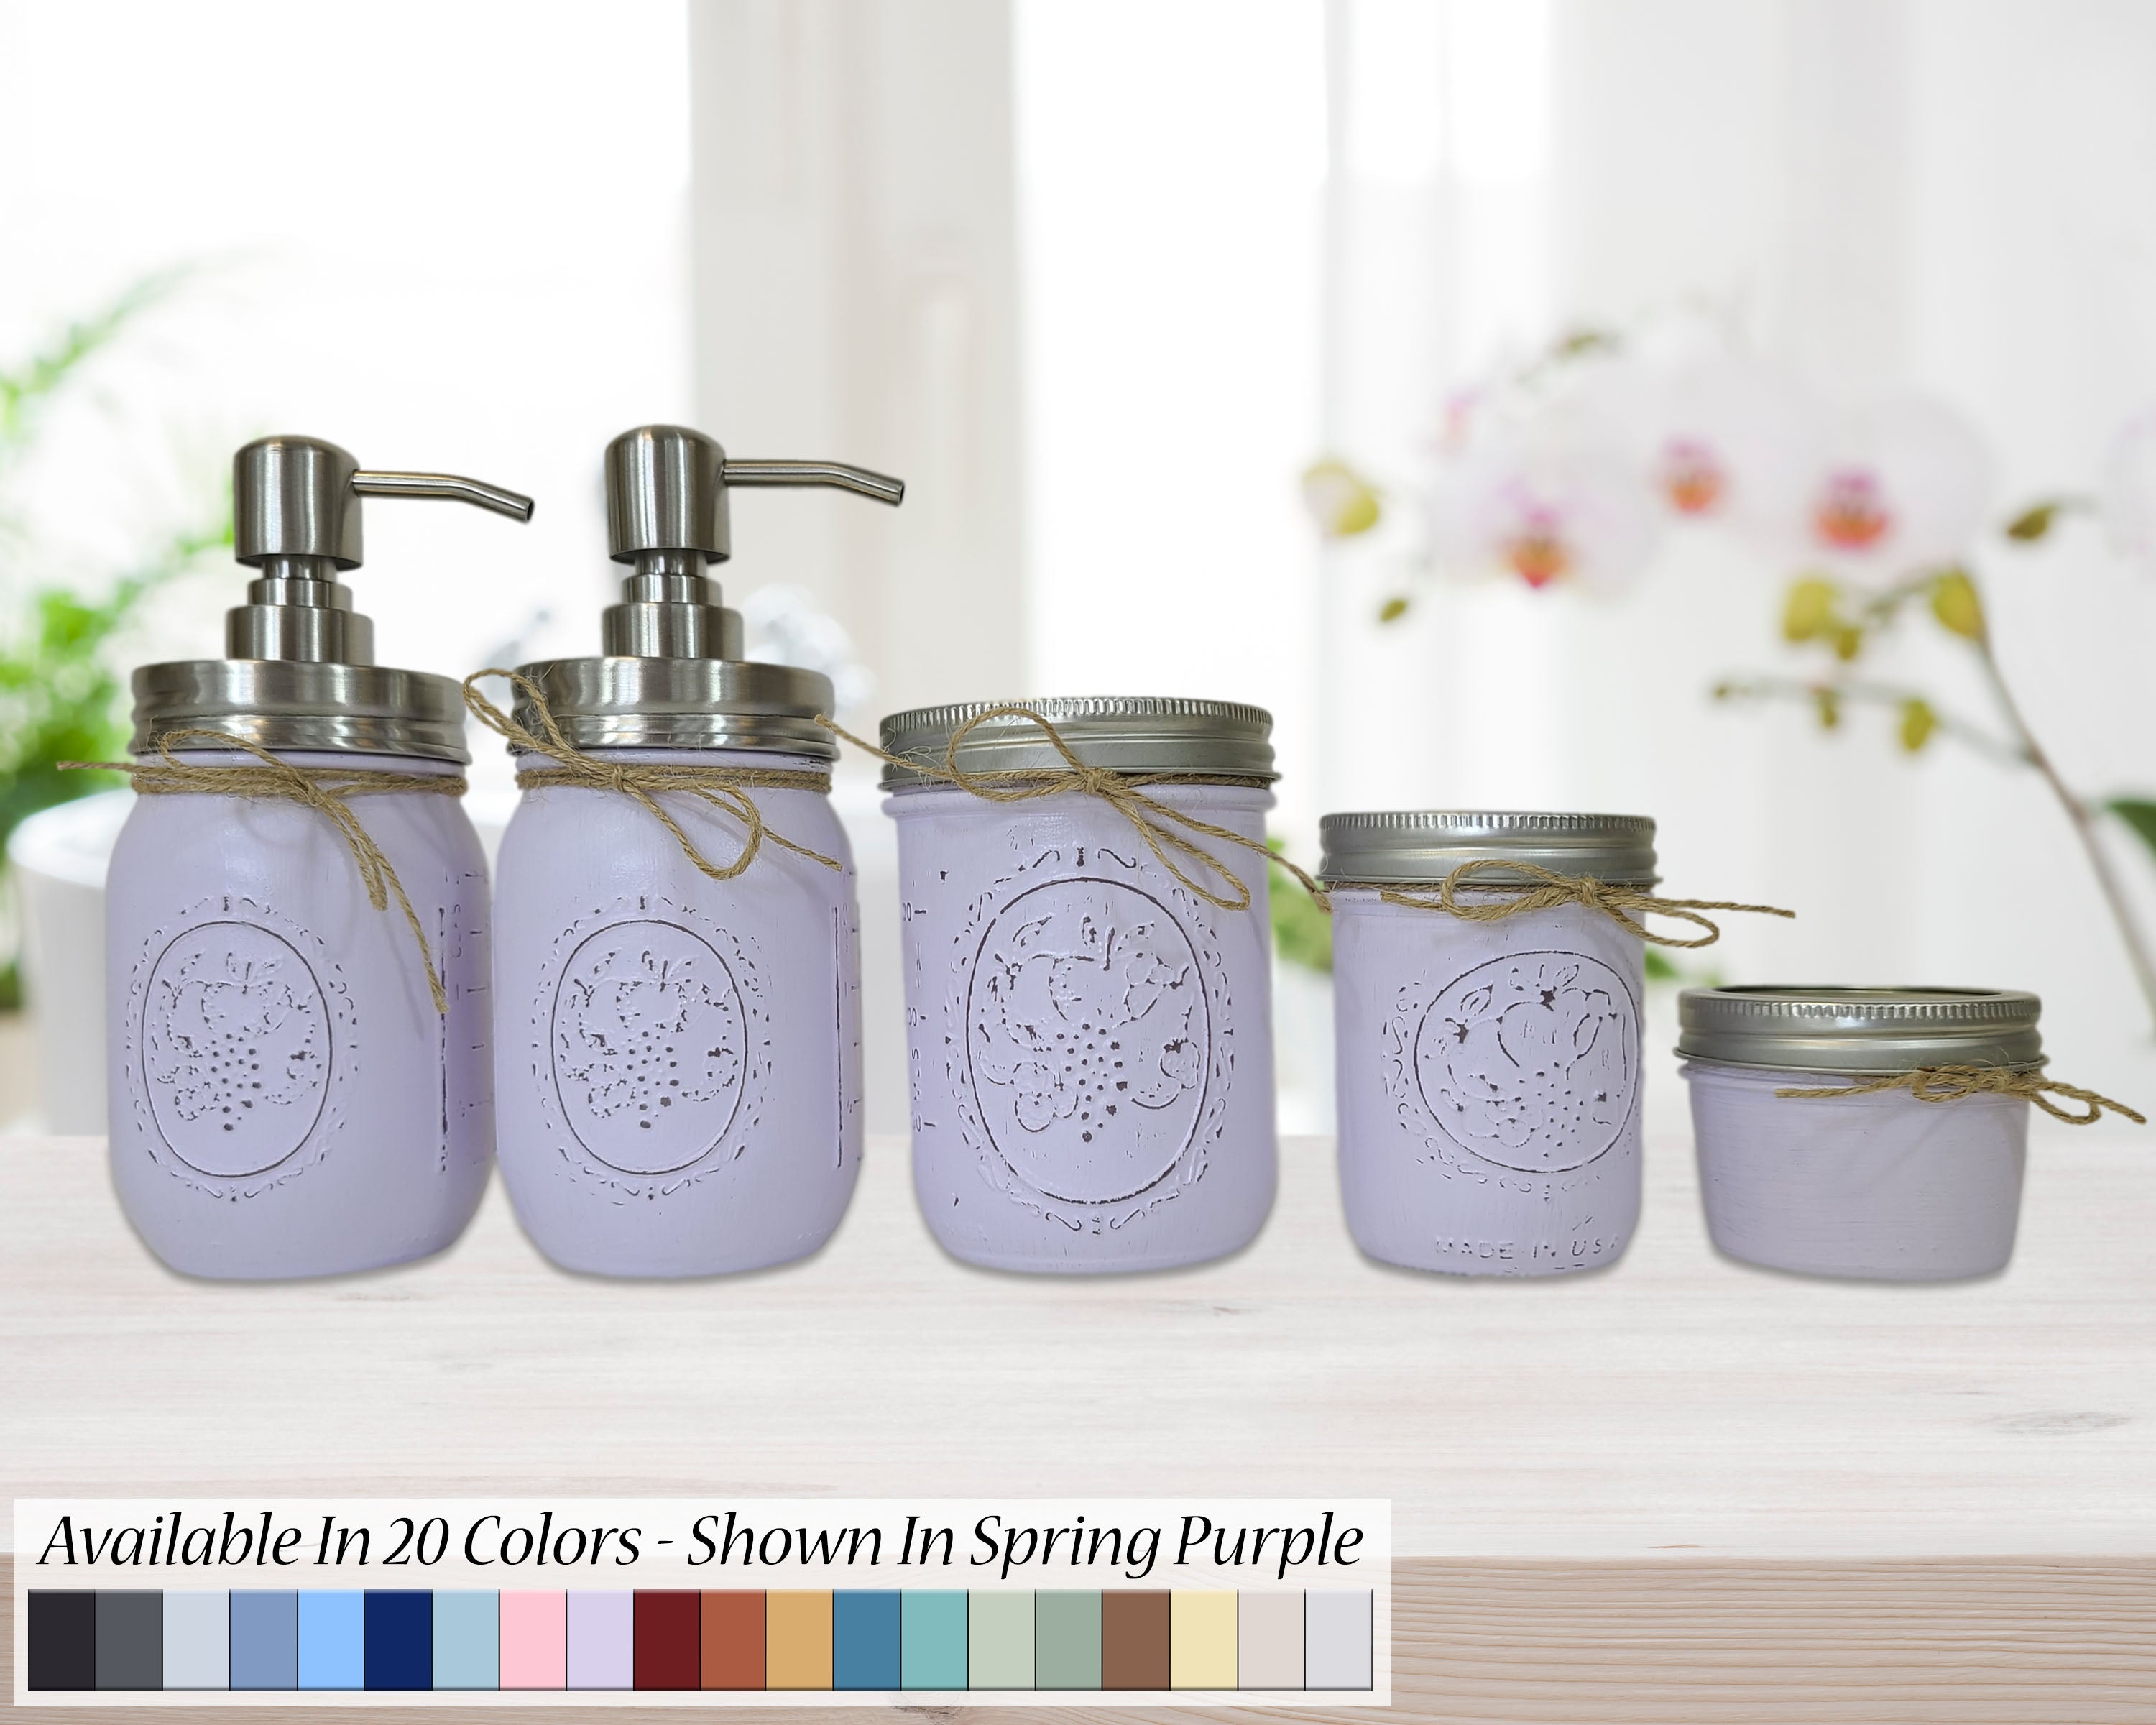 Custom Painted Mason Jar Bathroom Sets, Shown in Spring Purple with Silver Lids